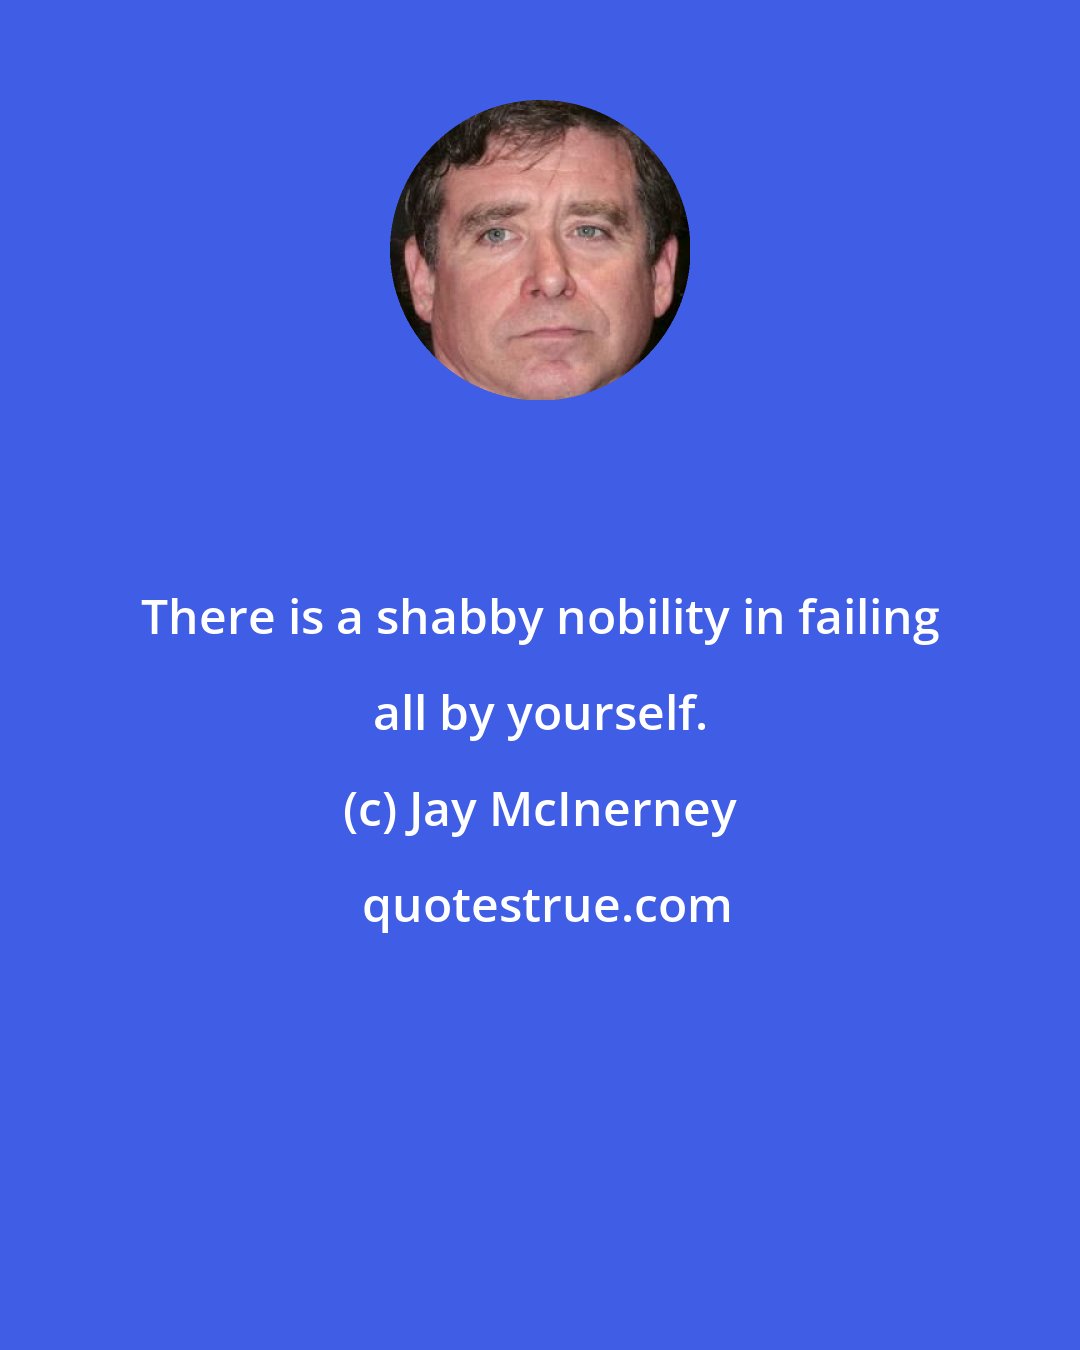 Jay McInerney: There is a shabby nobility in failing all by yourself.